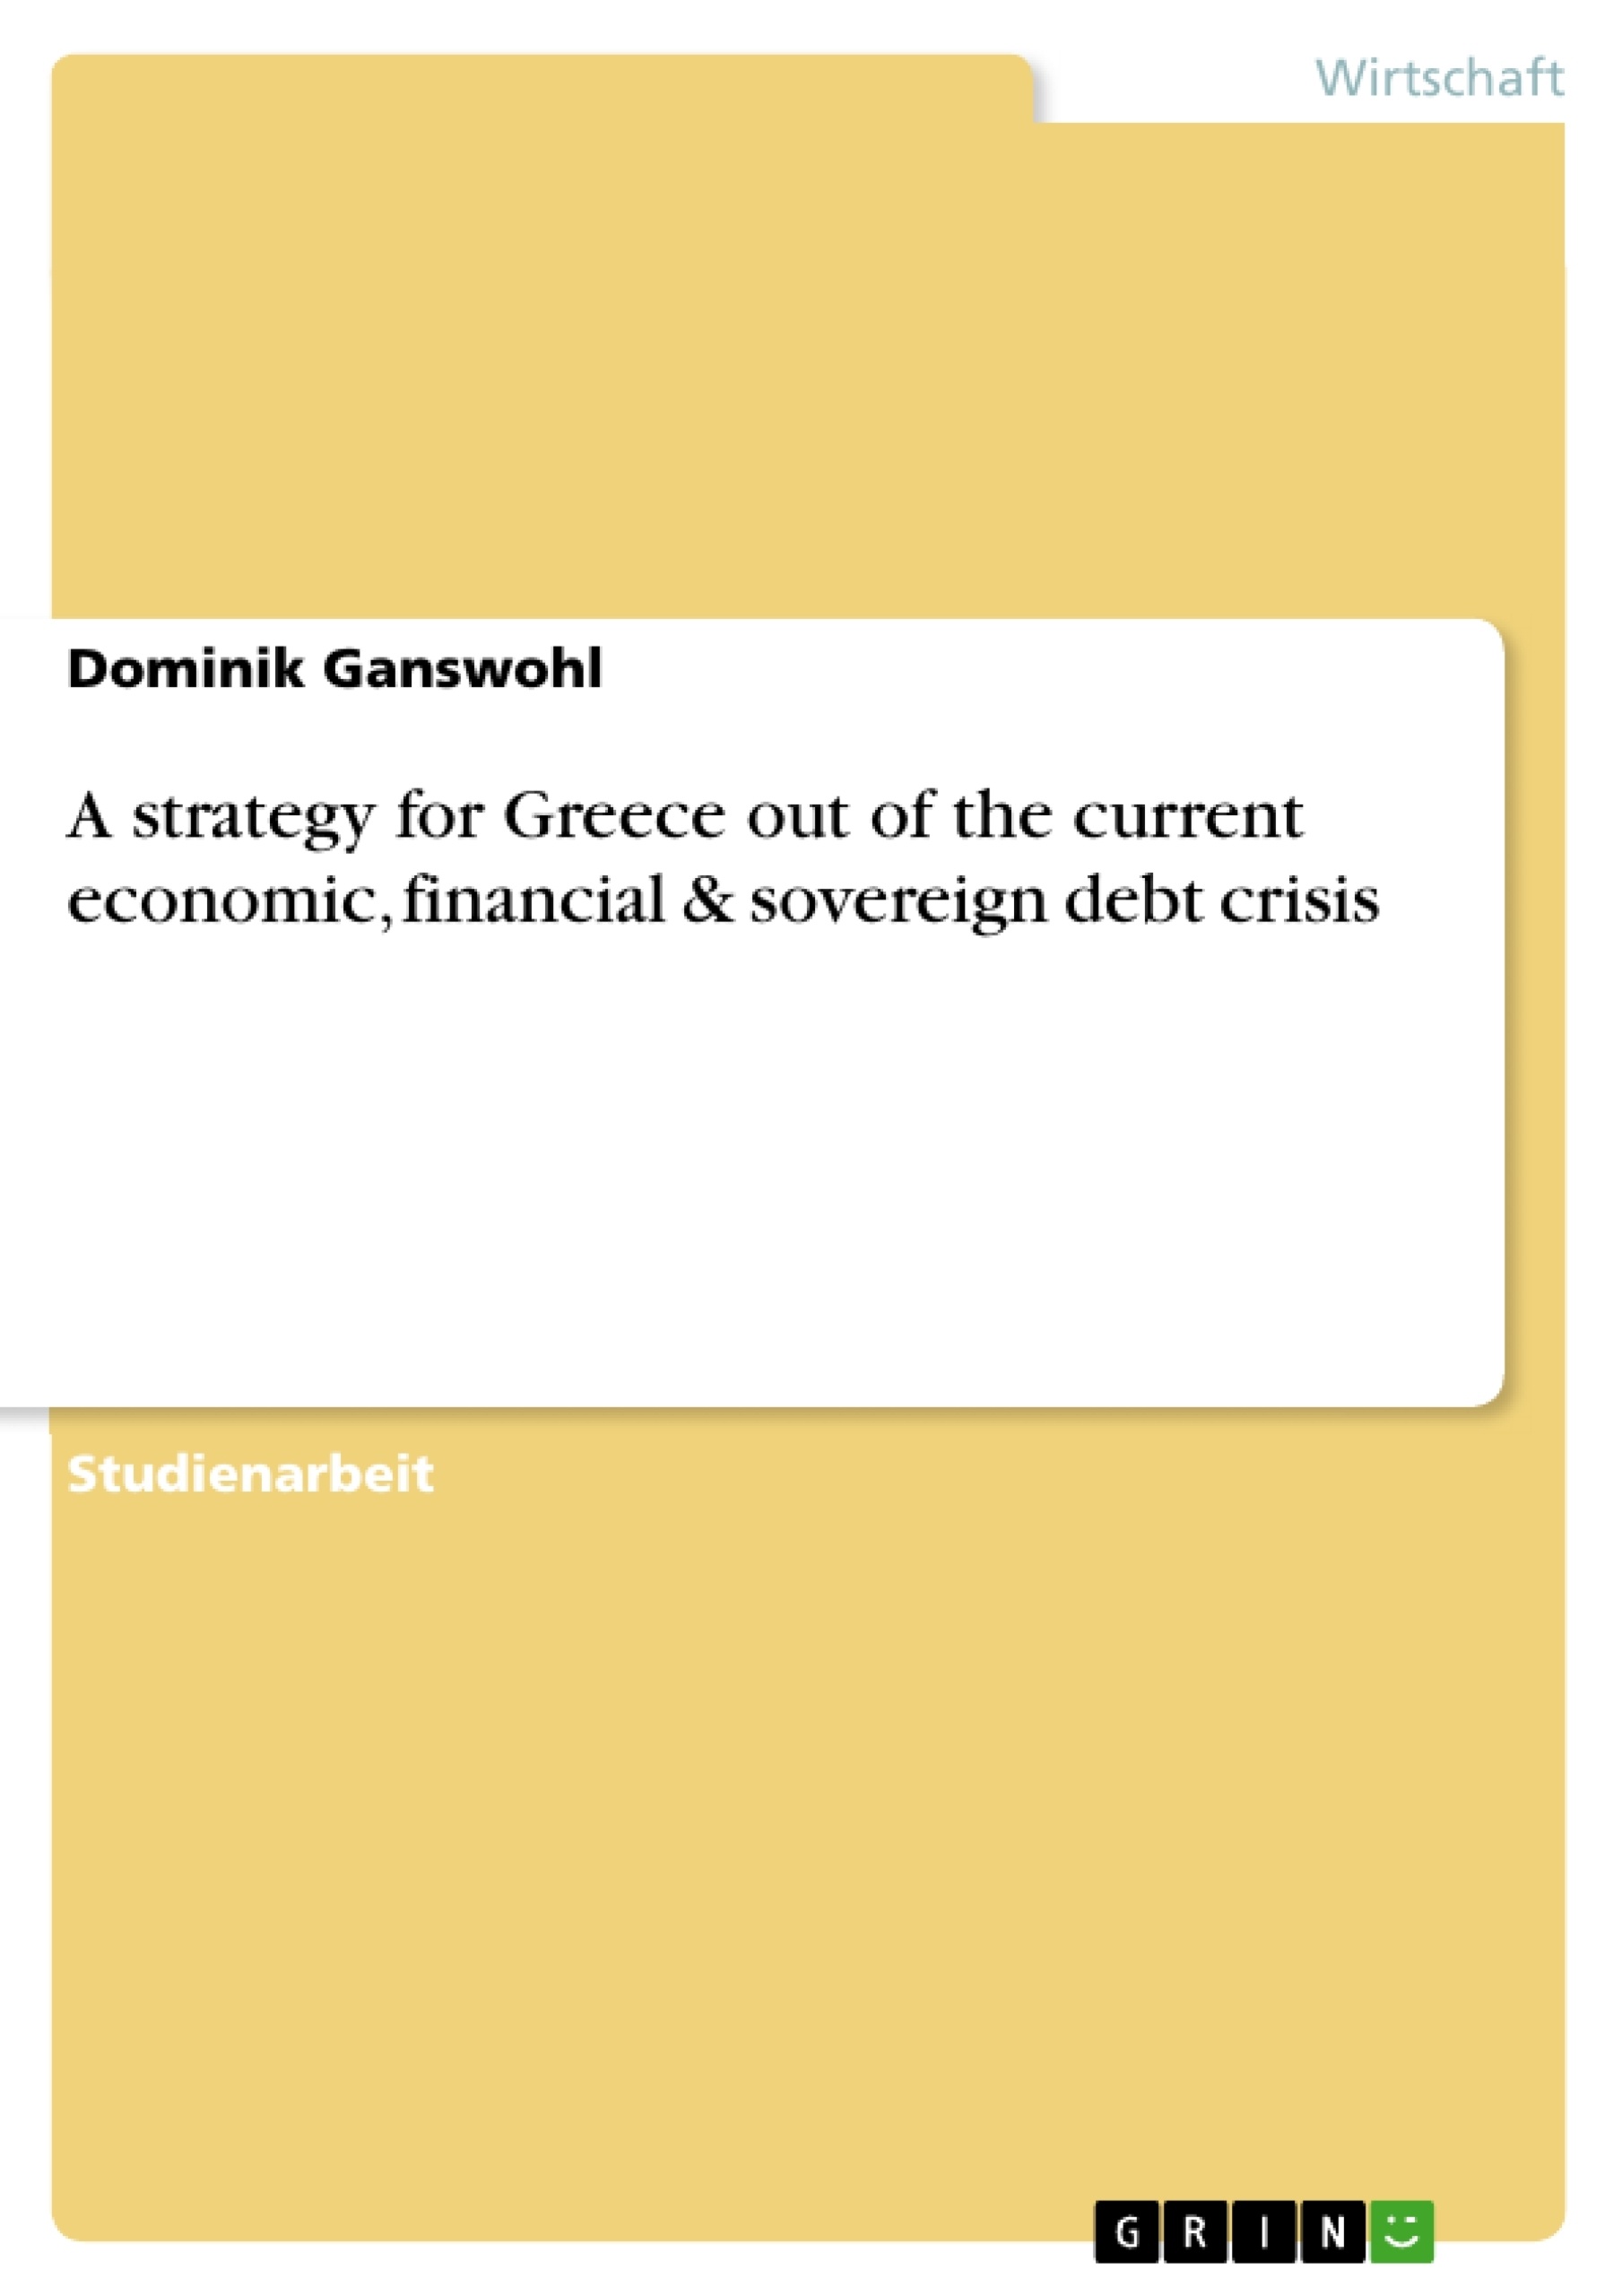 Título: A strategy for Greece out of the current economic, financial & sovereign debt crisis